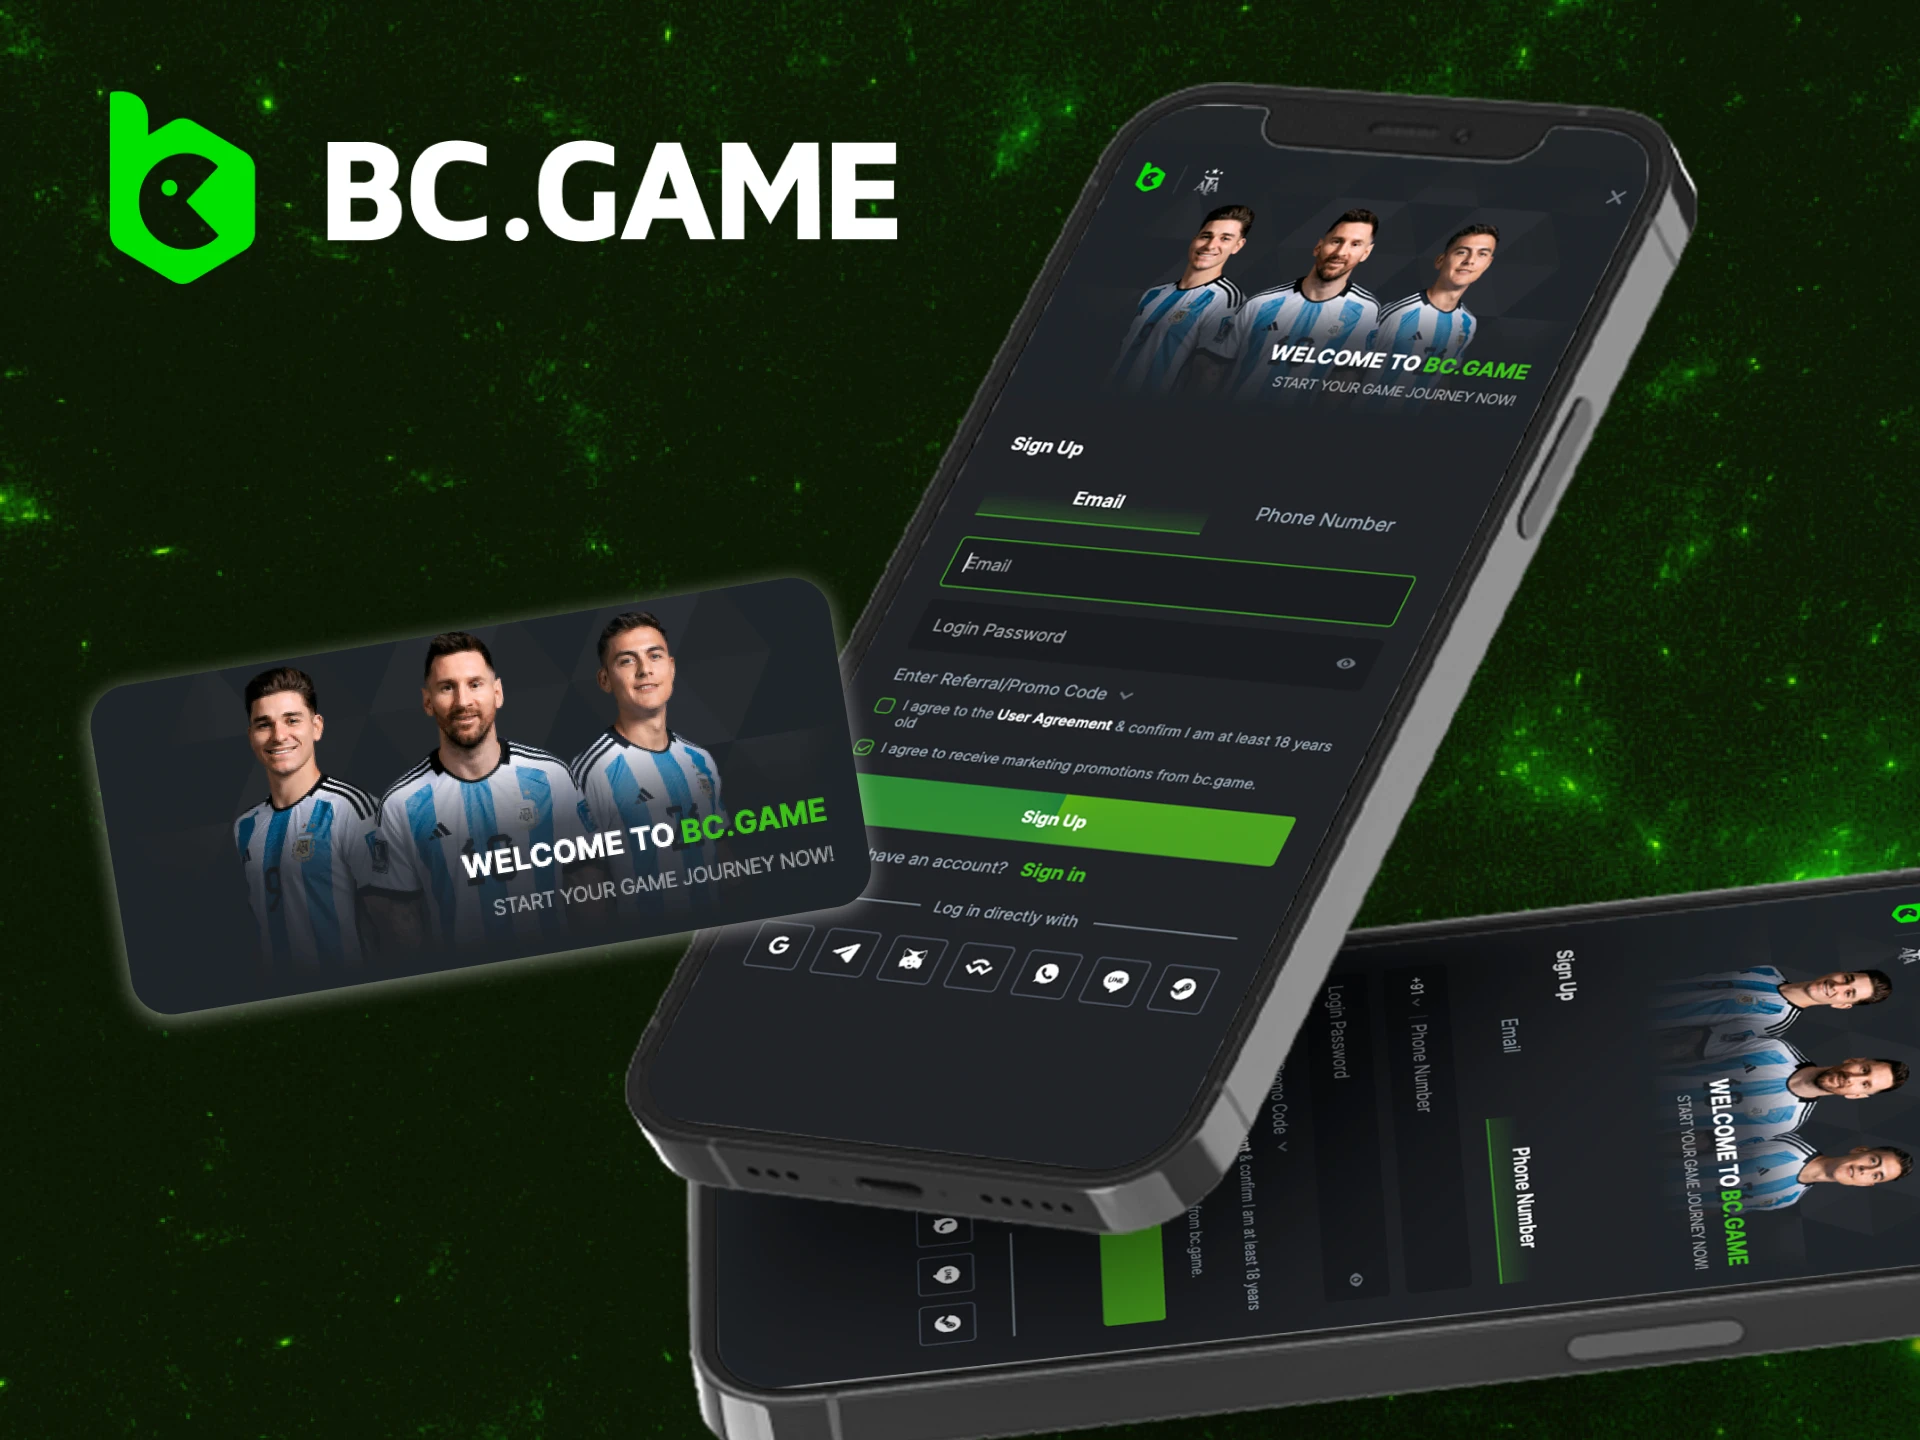 You can sign up for BC Game via your mobile phone.